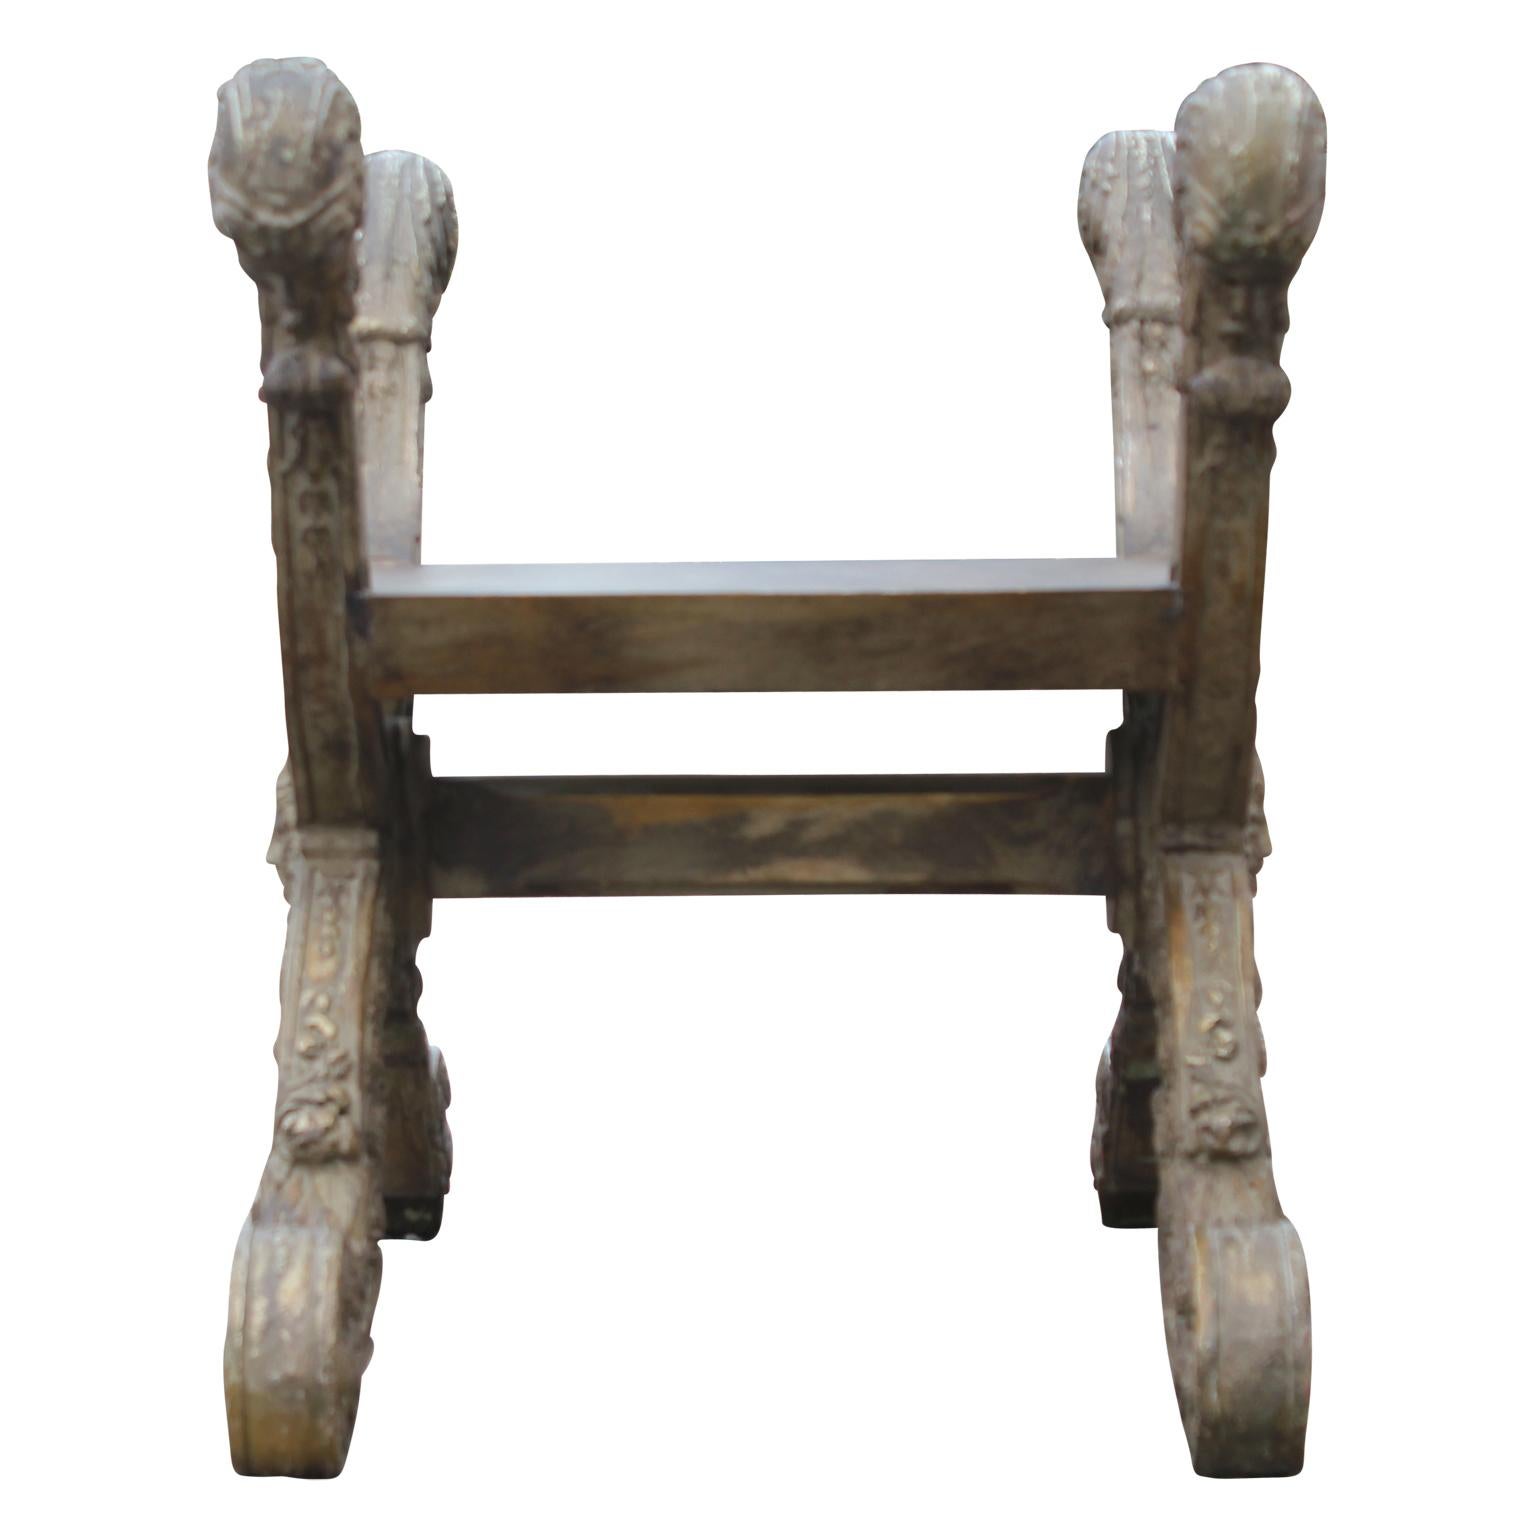 20th Century French Renaissance Style Curule Resin and Wood Stool or Bench